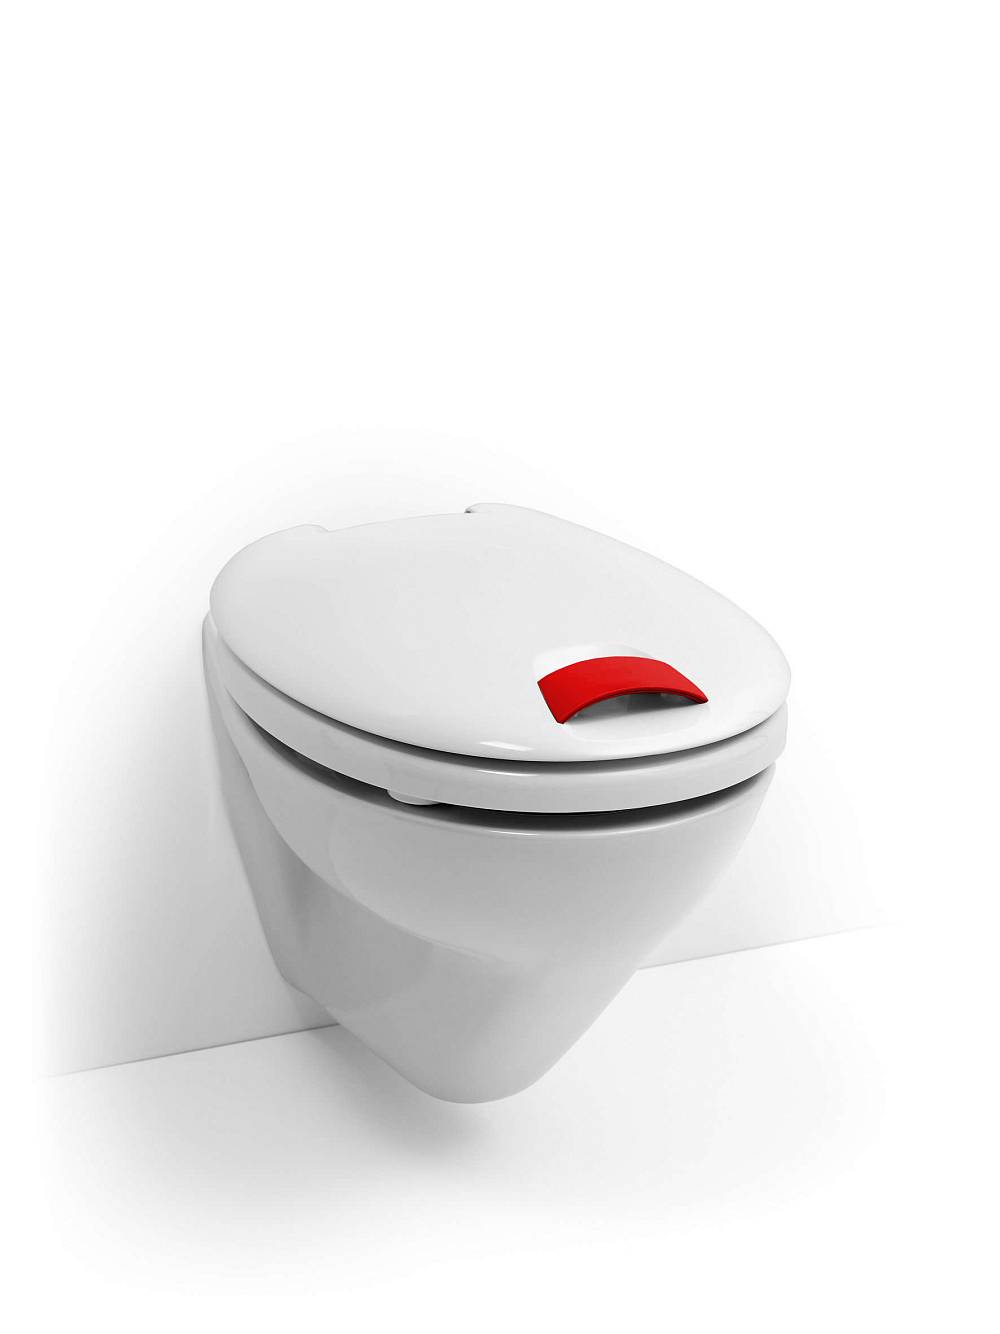 HAROMED toilet seat with red handle.